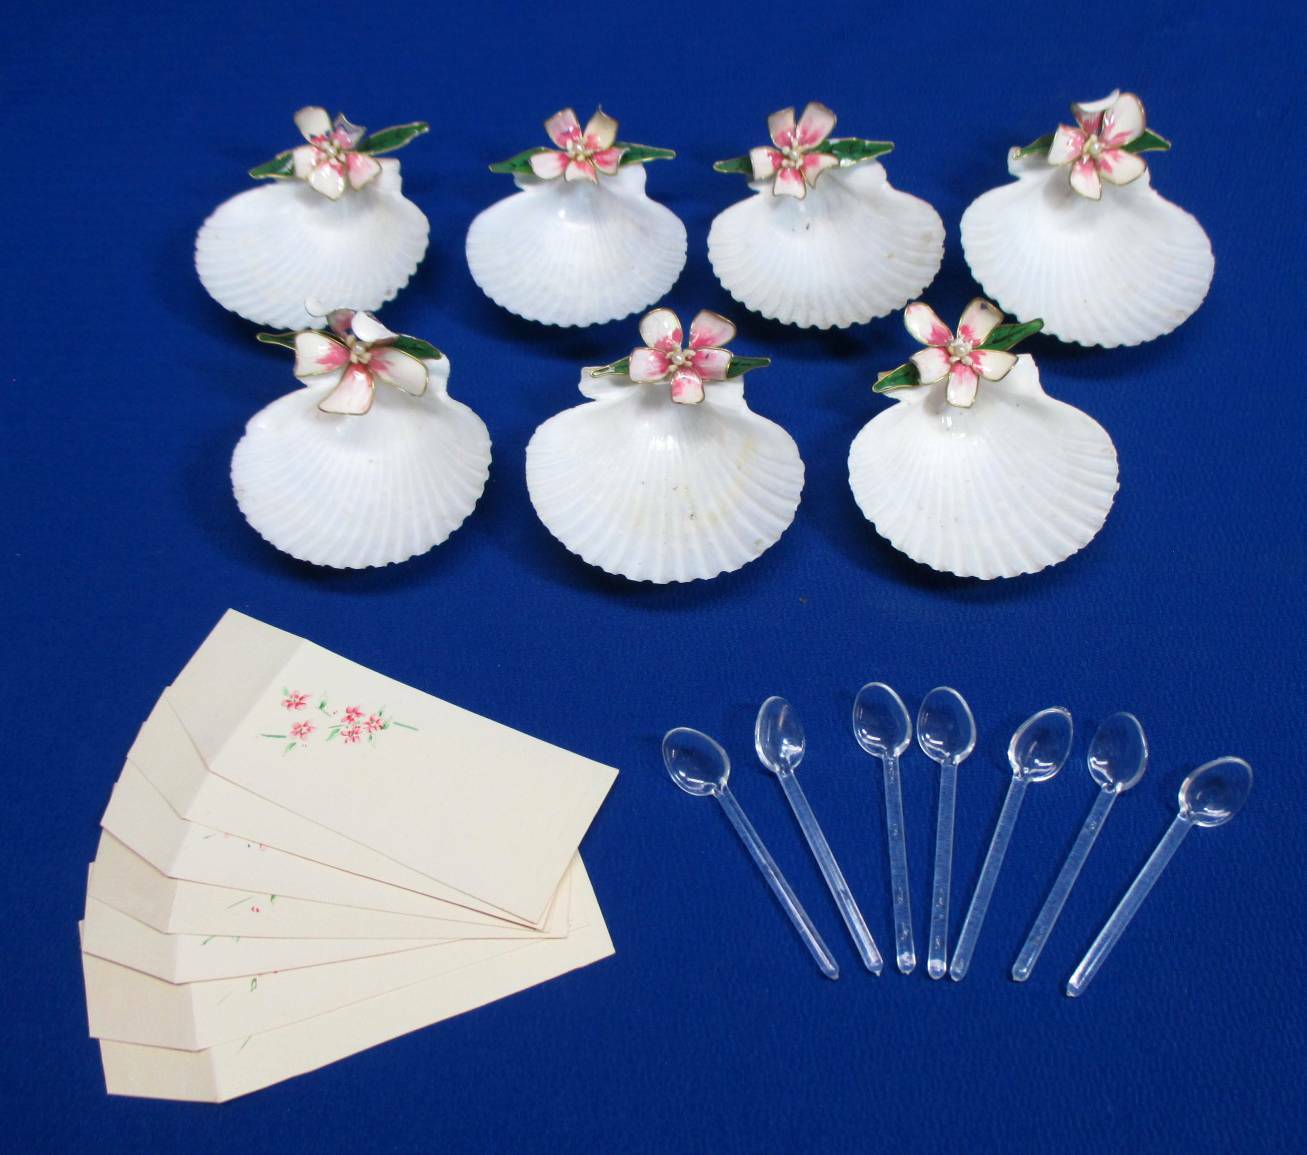 7 UNUSUAL SHELL & PORCELAIN FLOWERS SALT DIPS, SPOONS, & PLACE CARDS CA. 1950